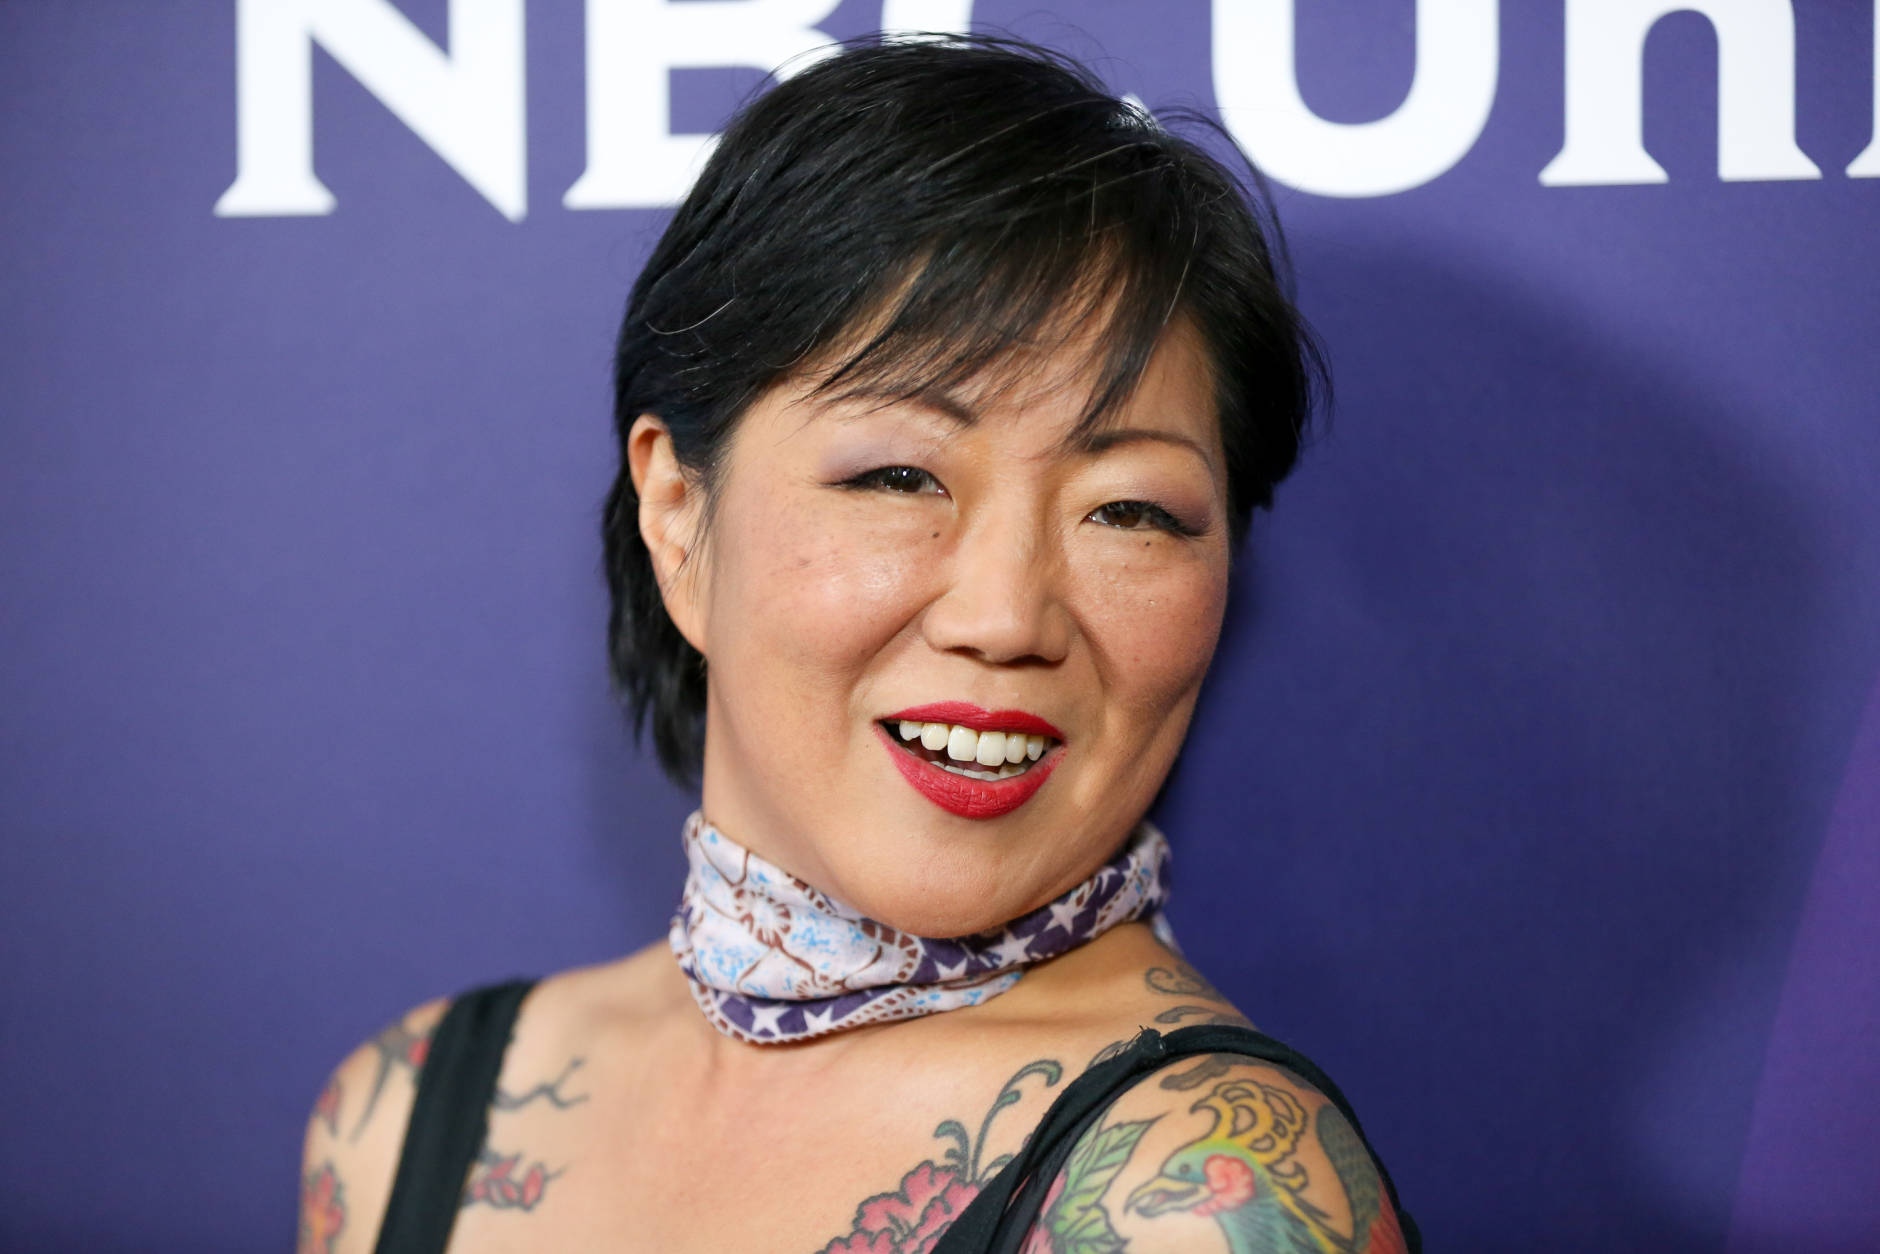 Margaret Cho, a cast member in the television series "Fashion Police," arrives at the NBCUniversal Television Critics Association summer press tour on Wednesday, Aug. 3, 2016, in Beverly Hills, Calif. (Photo by Rich Fury/Invision/AP)